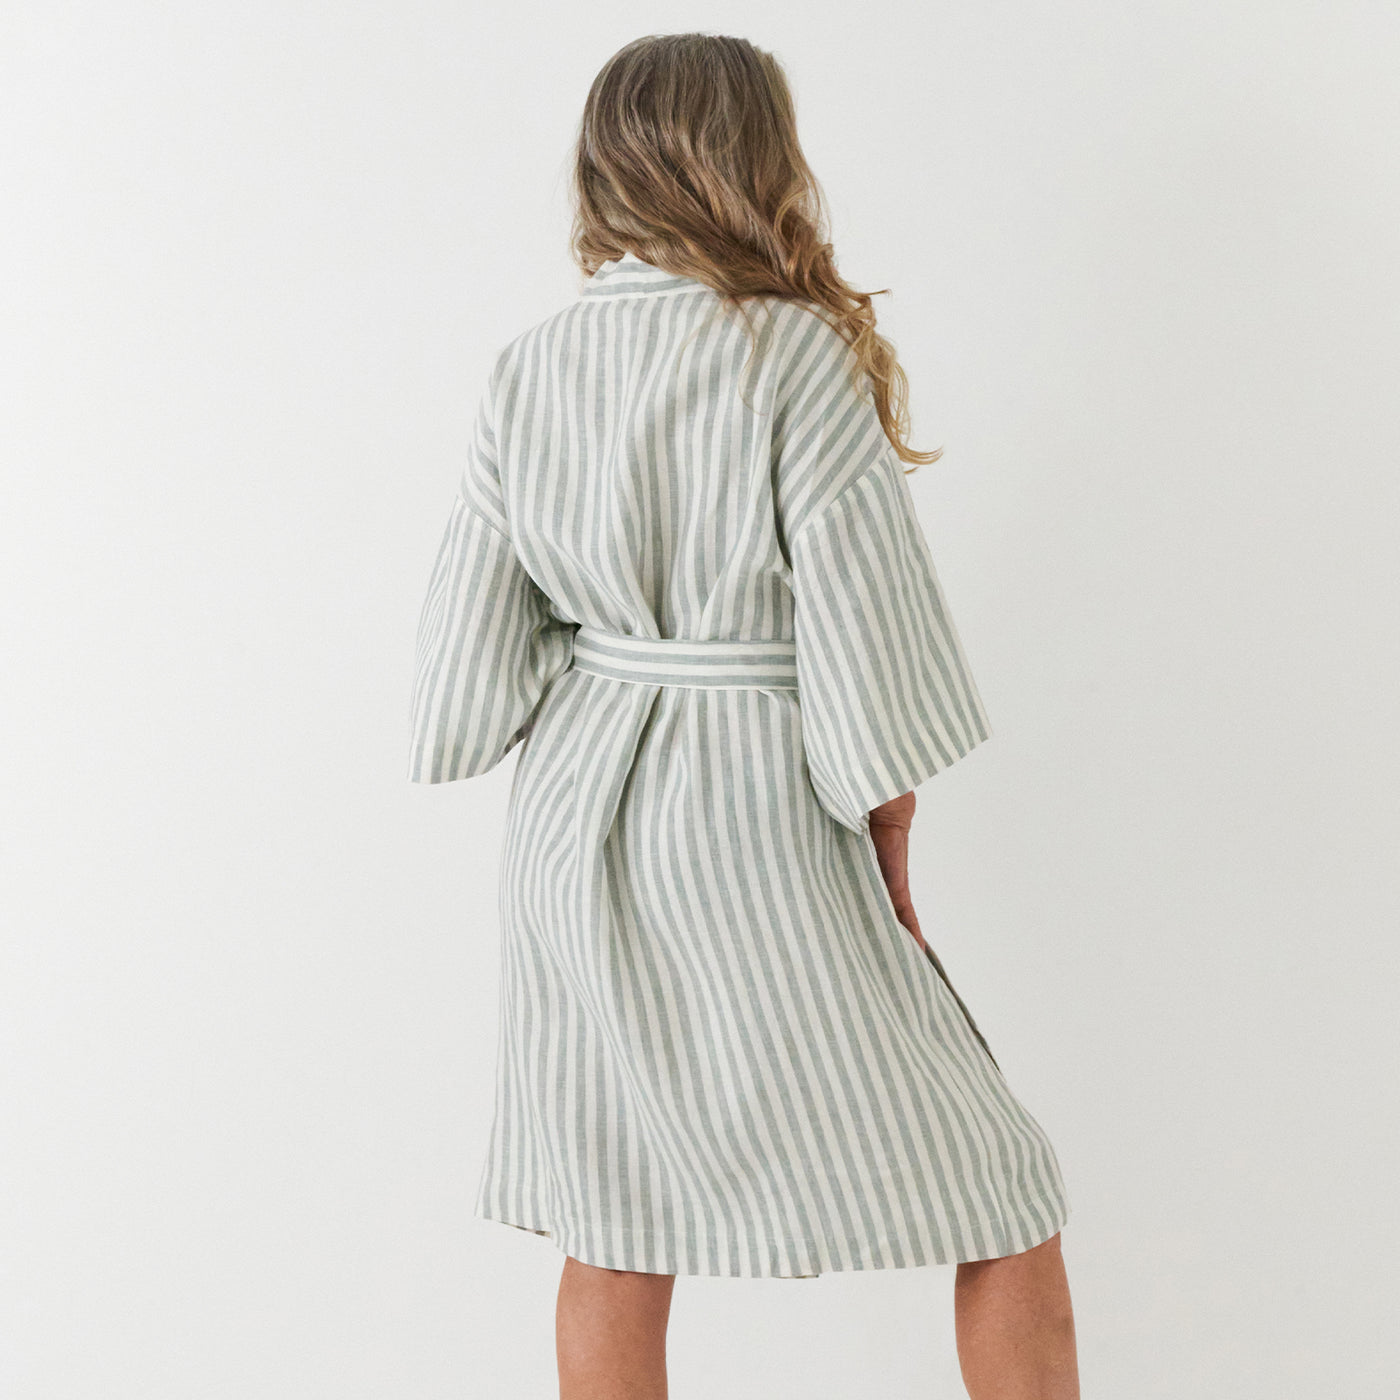 French Flax Linen Robe in Sage Stripe